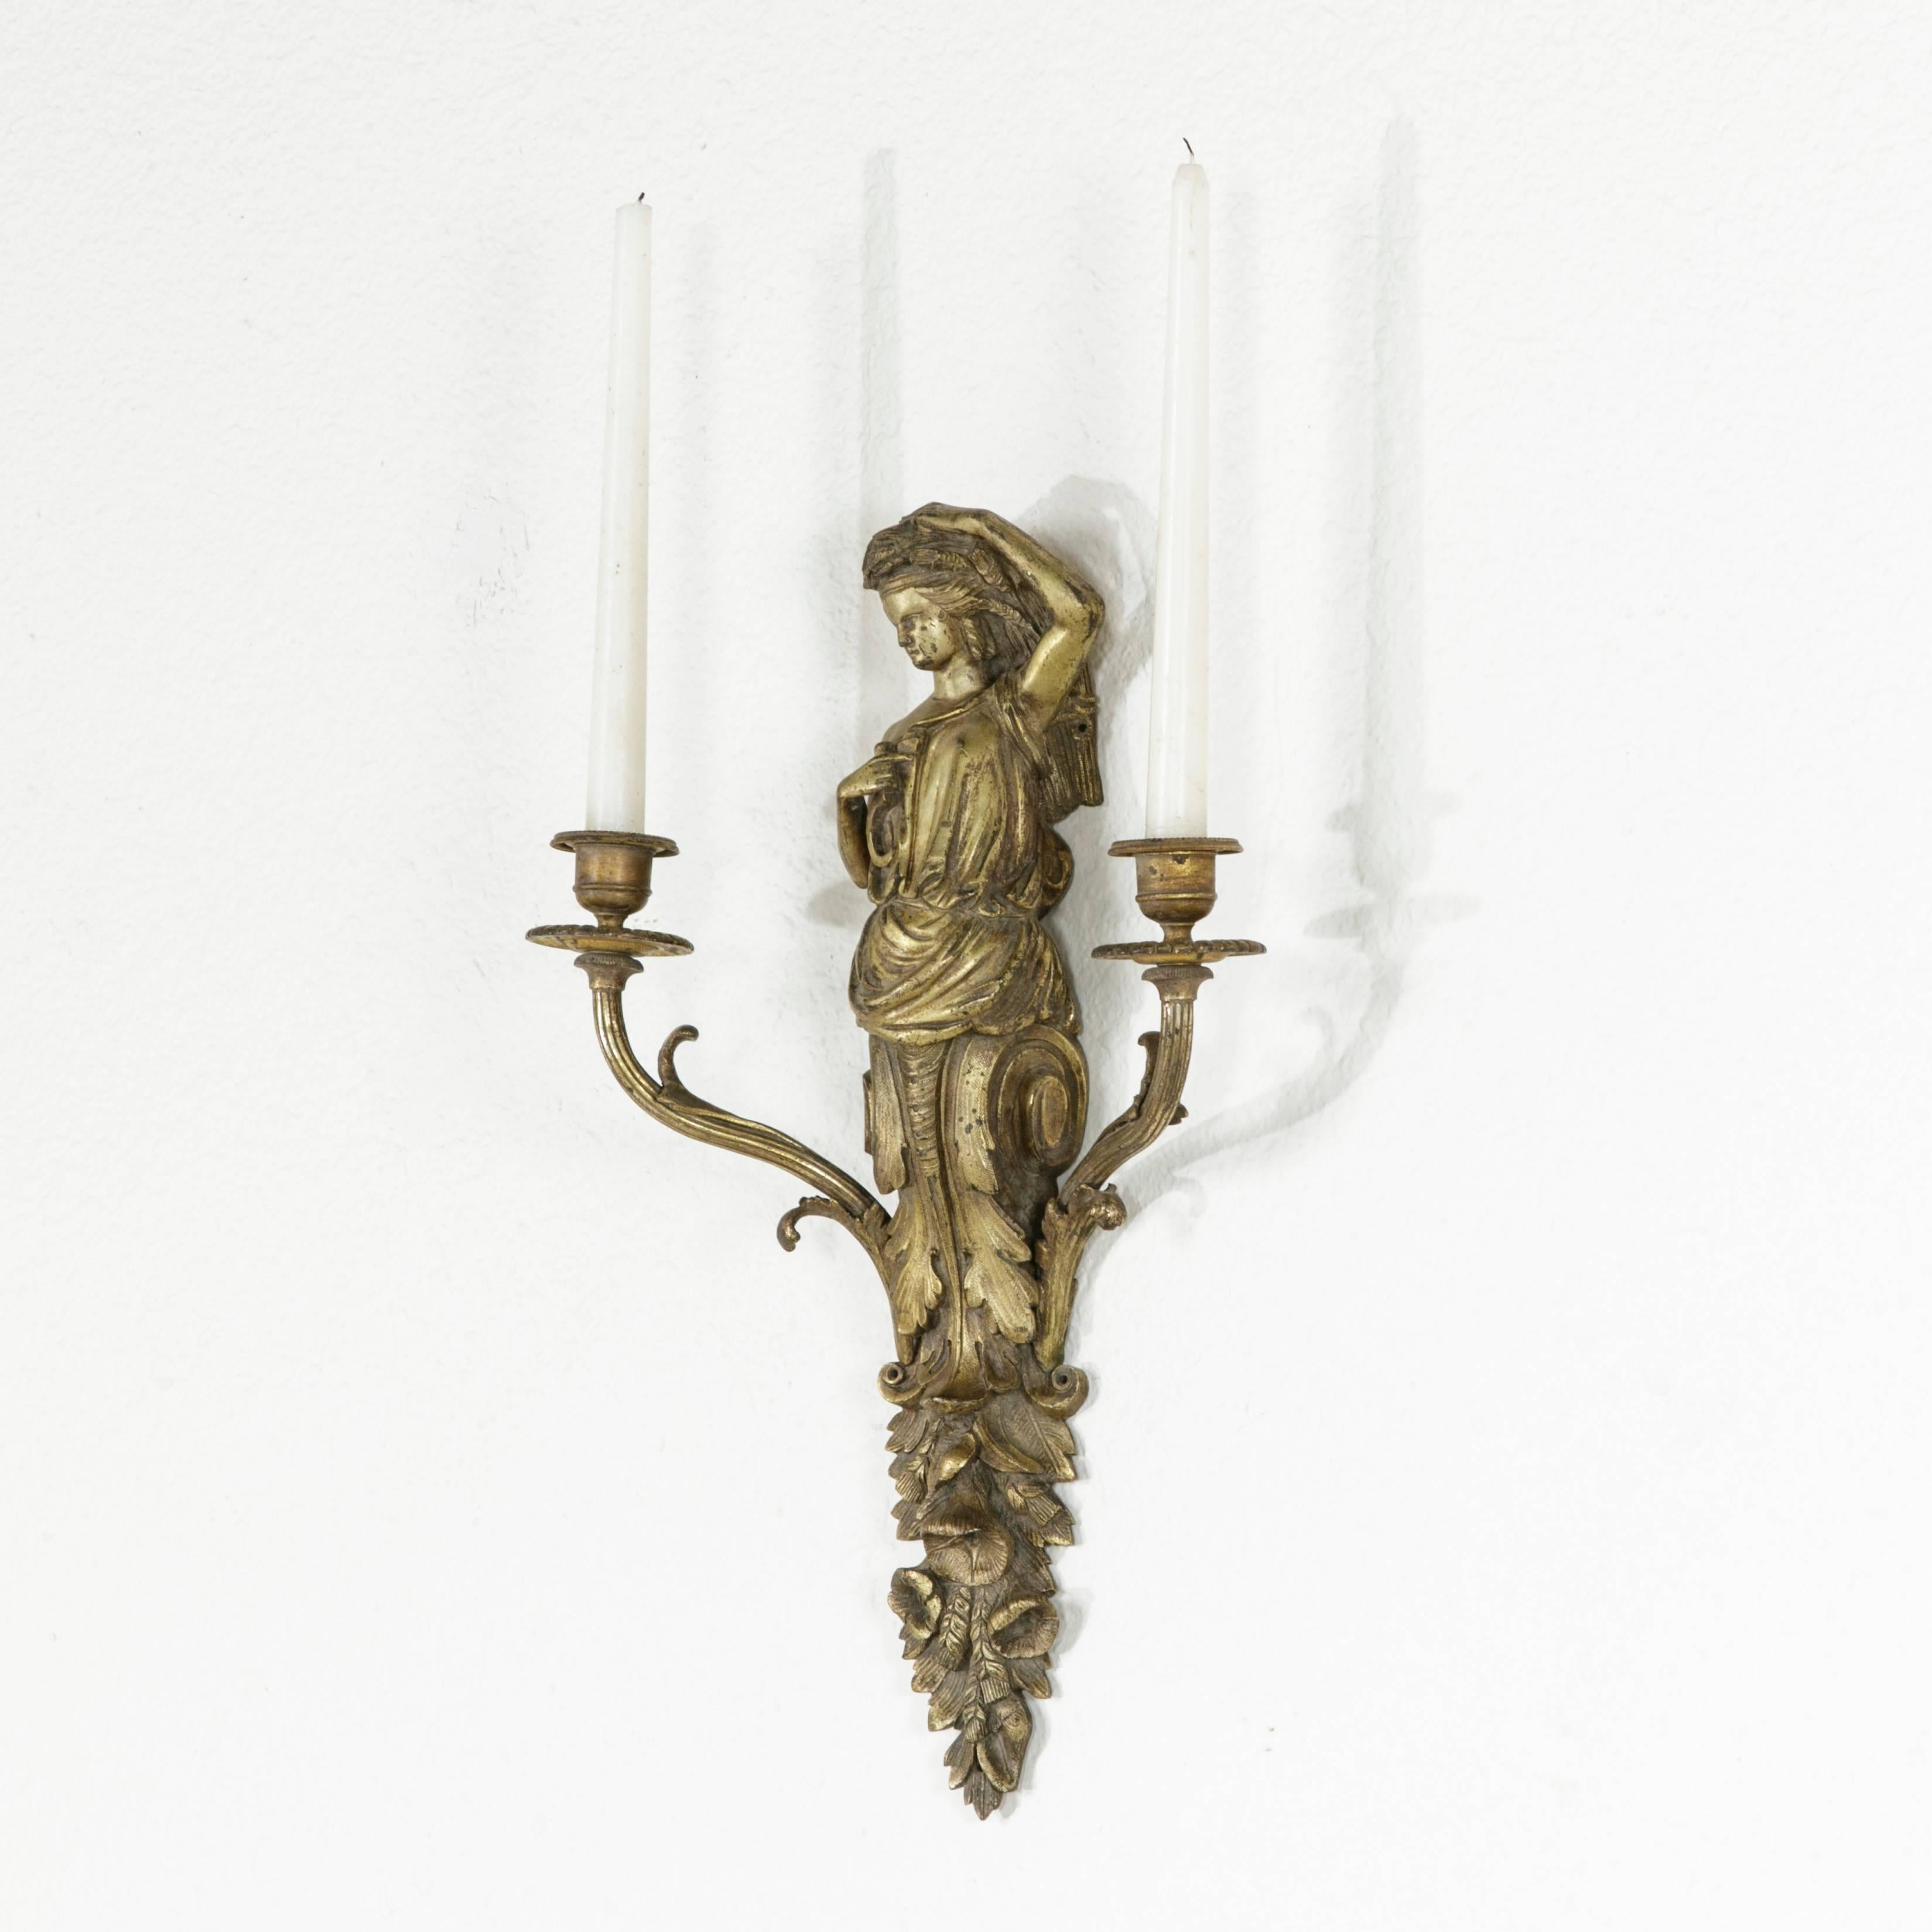 This Napoleon III period bronze sconce features a classical female figure standing atop curling acanthus and flowers. Two candle arms extend from the floral base. The unusual large size of this piece paired with its intricate solid bronze